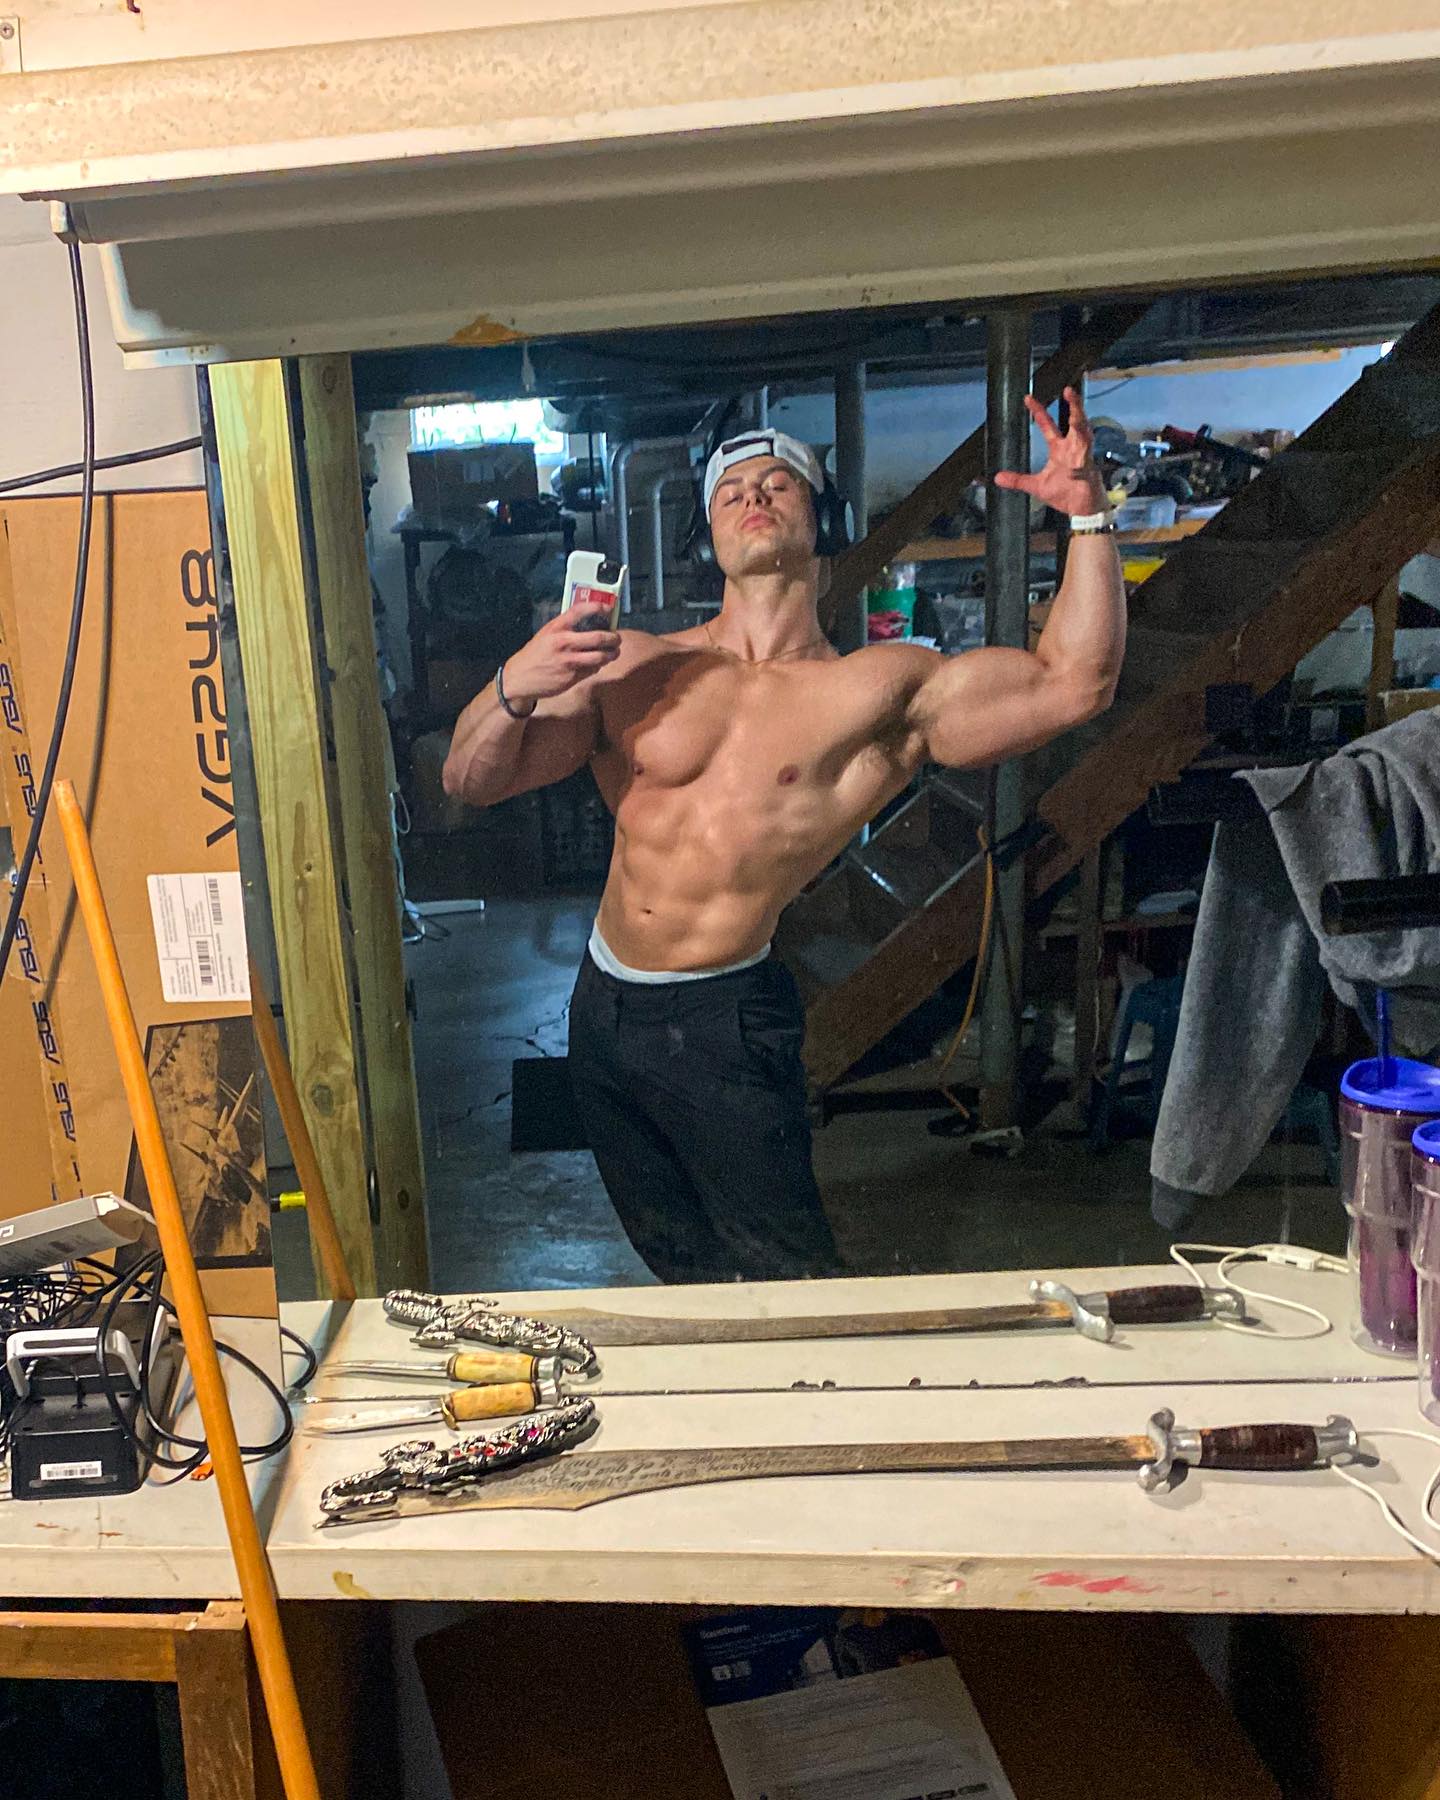 Nothing like a Dungeon lift w/ a lil tadaddy 😫🥴
#dungeonsanddragons 

@halfnattys_  code daddy for crazyyy 💦

#shredded #classicphysique #bodybuilding #biceps #gains #tadalafil #dungeon #pump #armday